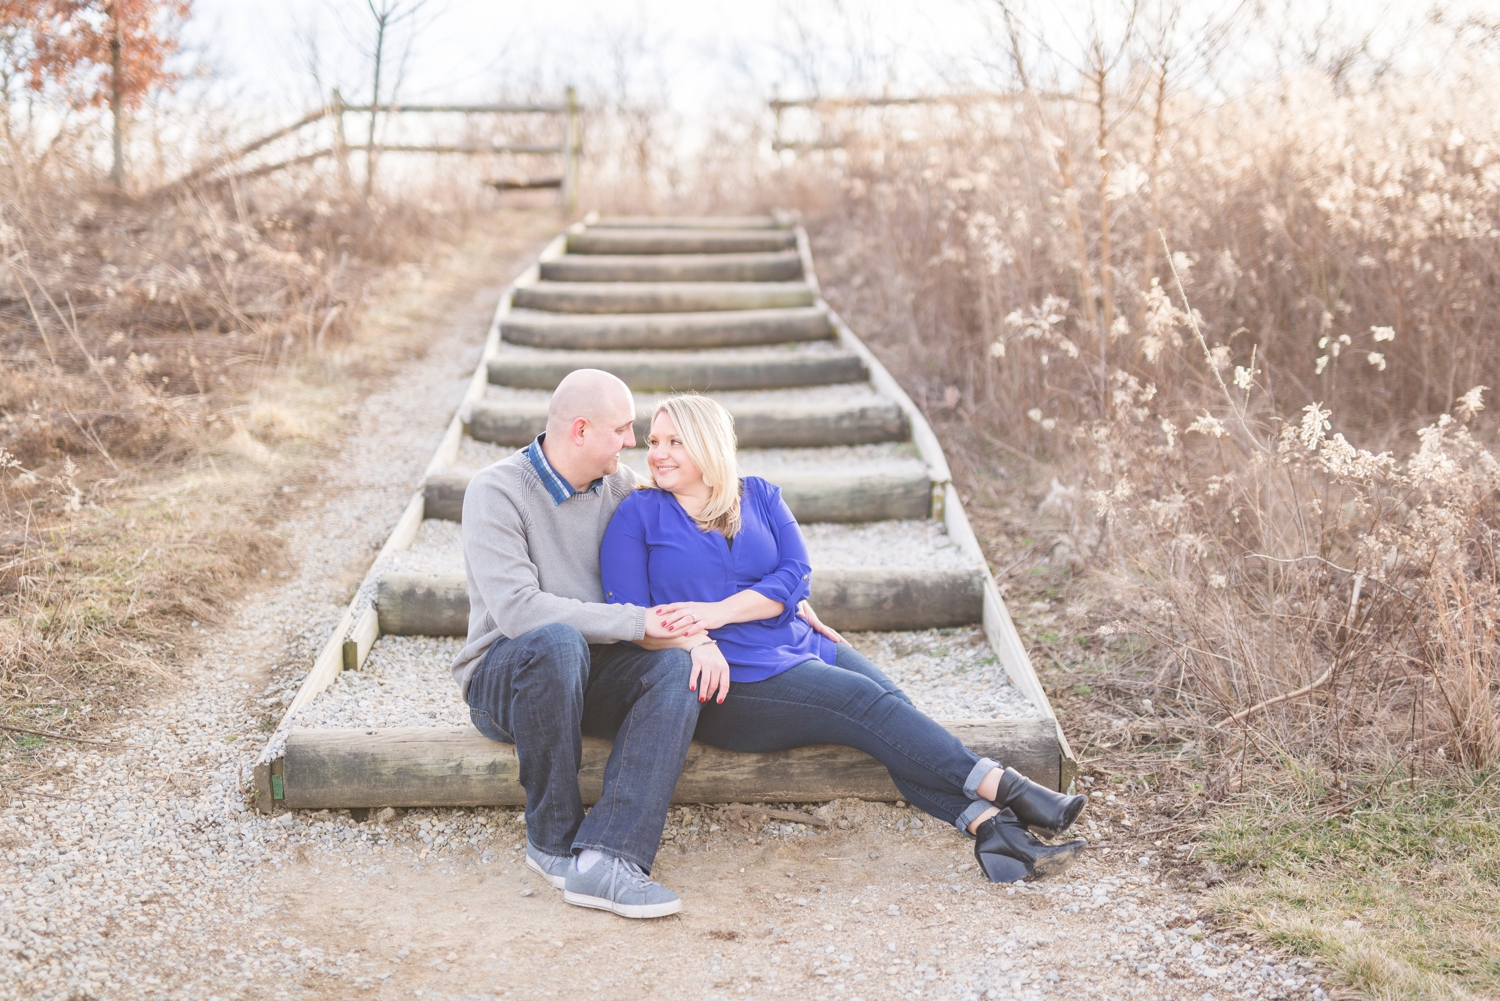 winter-engaged-couple-at-their-photo-session-at-the-scioto-audubon-park-near-grange-audubon-center-with-walkways-and-grass_0339